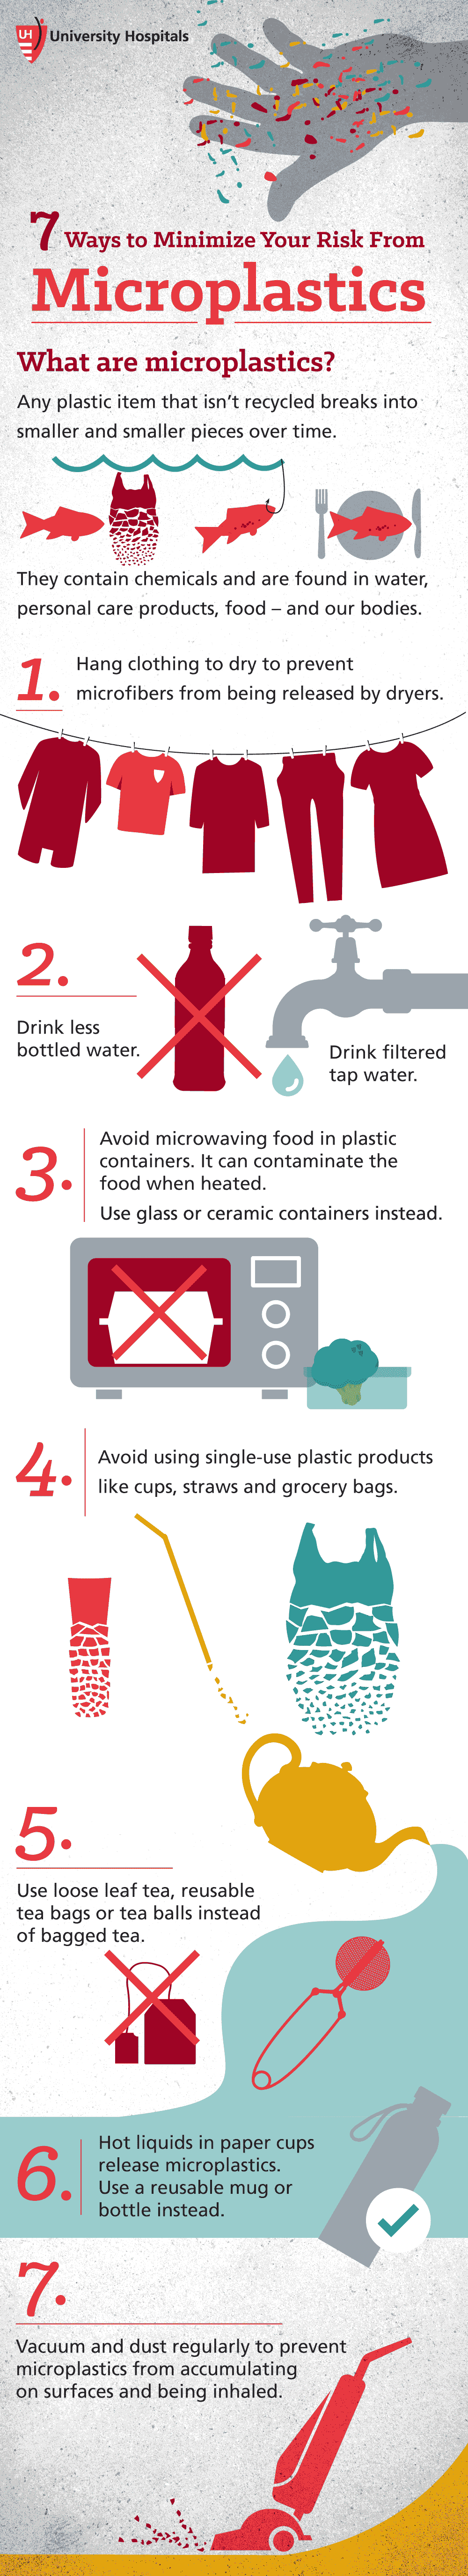 Every plastic item that doesn’t get recycled breaks into smaller and smaller pieces over time. Here's how to reduce your exposure.